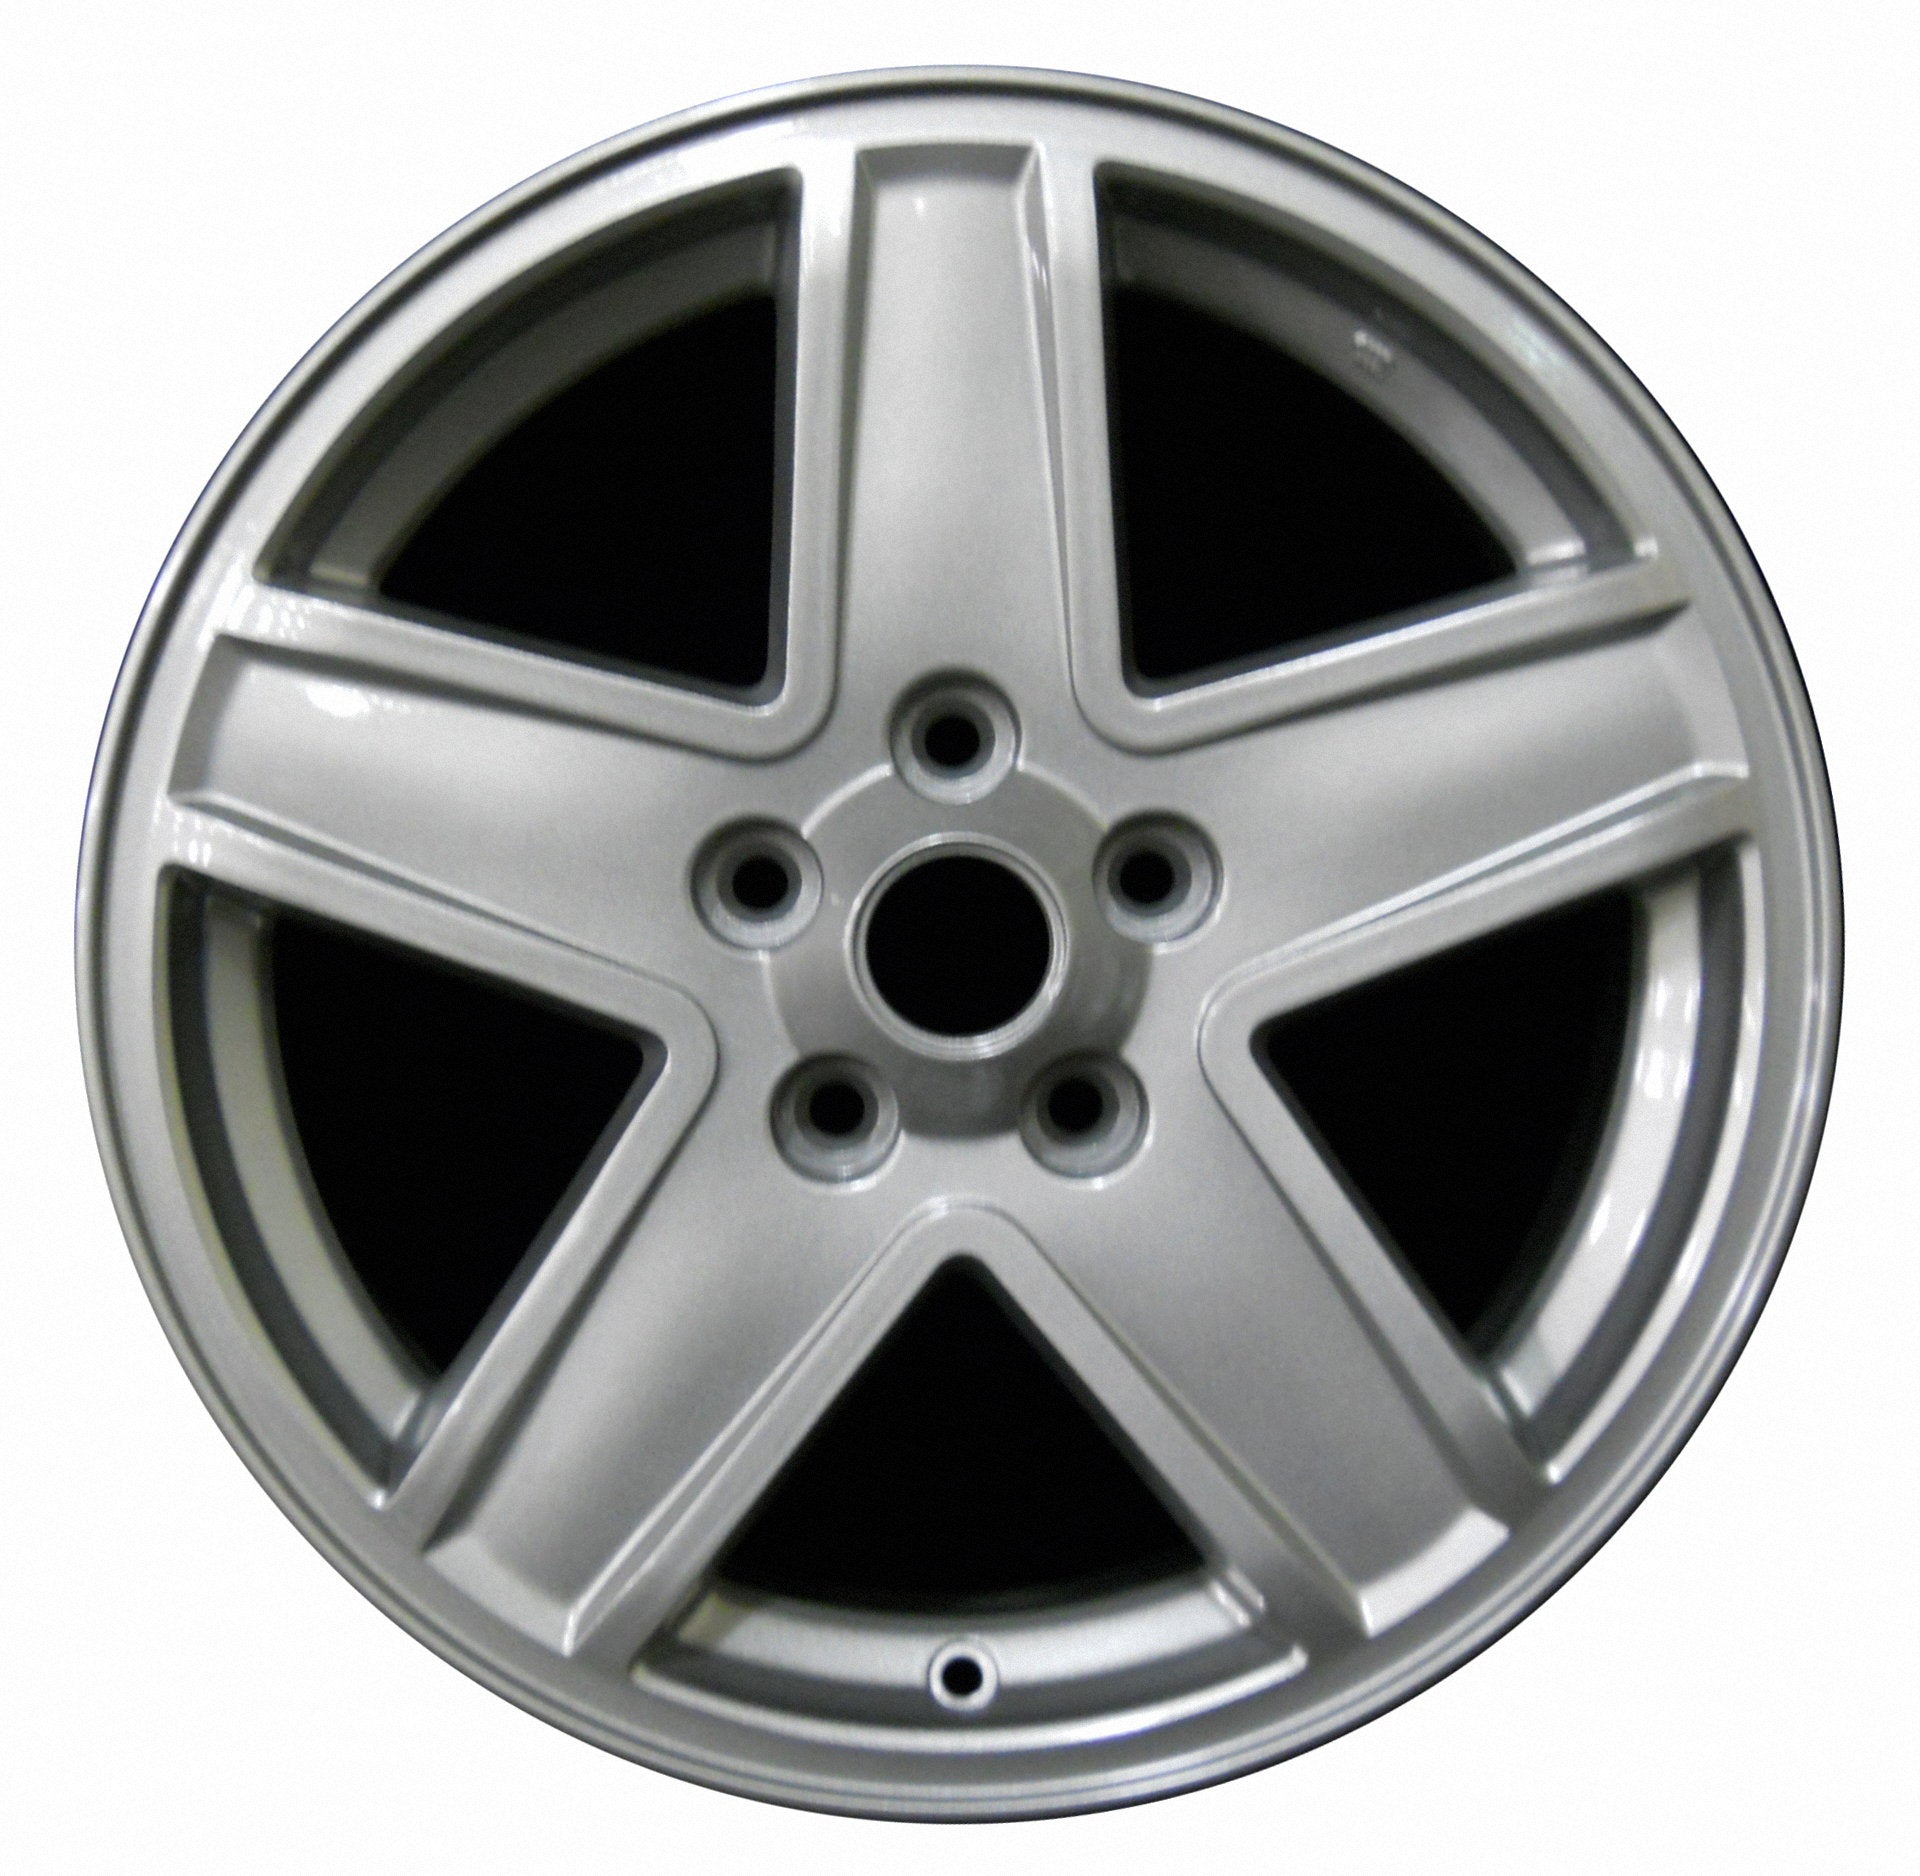 Jeep Compass  2007, 2008, 2009, 2010 Factory OEM Car Wheel Size 17x6.5 Alloy WAO.9069.LS04.FF